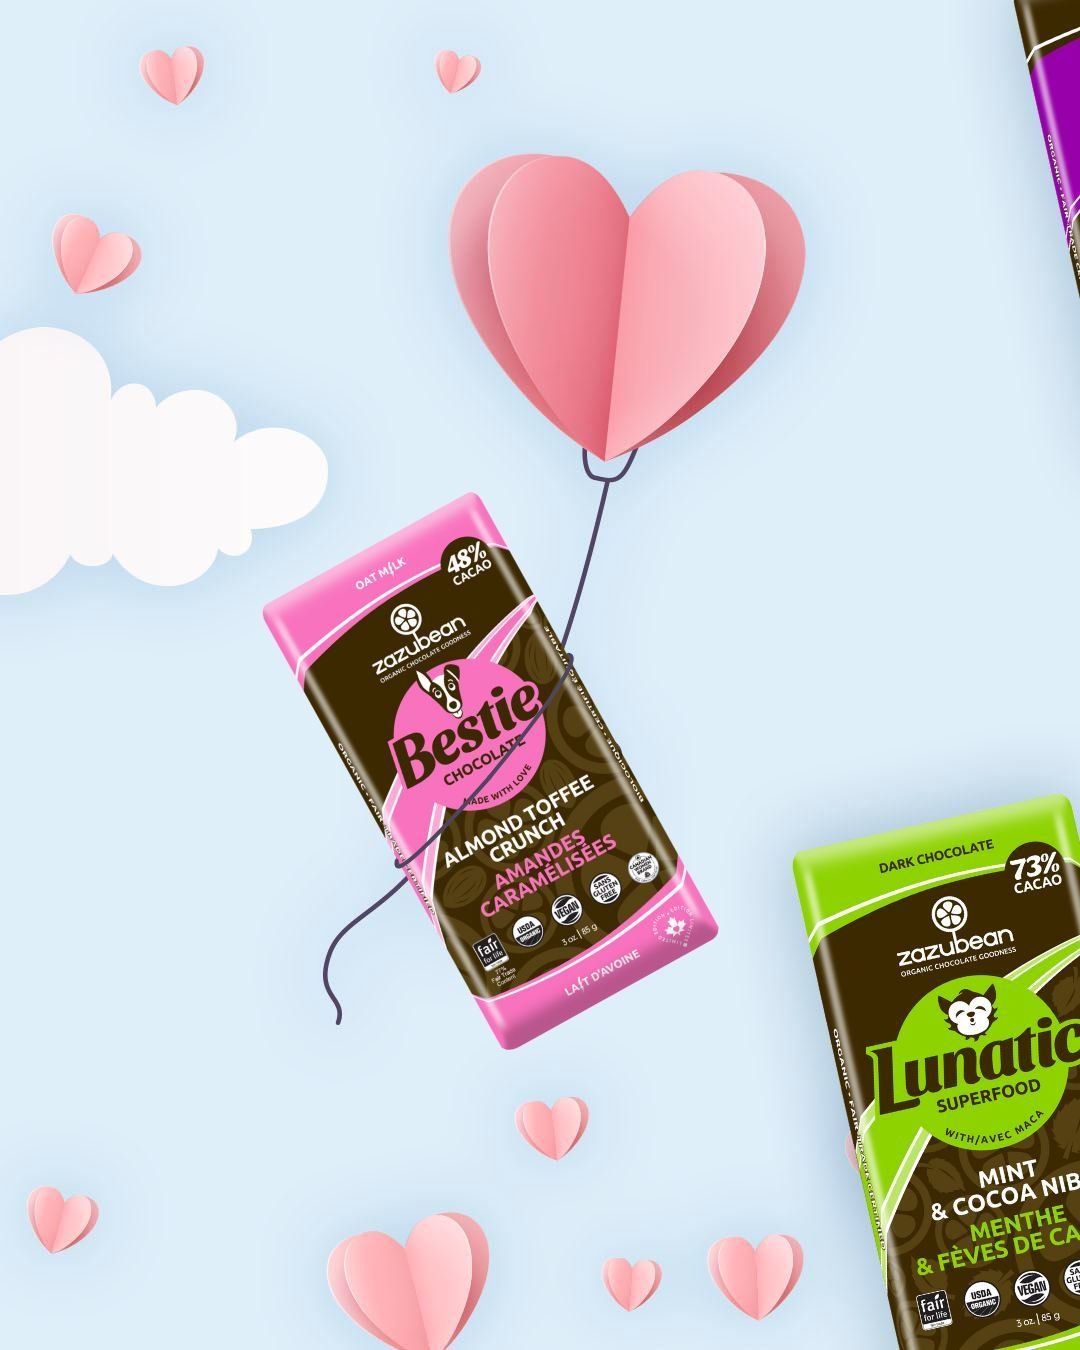 Celebrate your best friend: Mom! 💖⁠
⁠
This Mother's Day, surprise her with the gift of #Zazubean's organic chocolates. Our wide selection of flavors and textures ensures there's a perfect match for her taste. Let her indulge in the rich, smooth, and